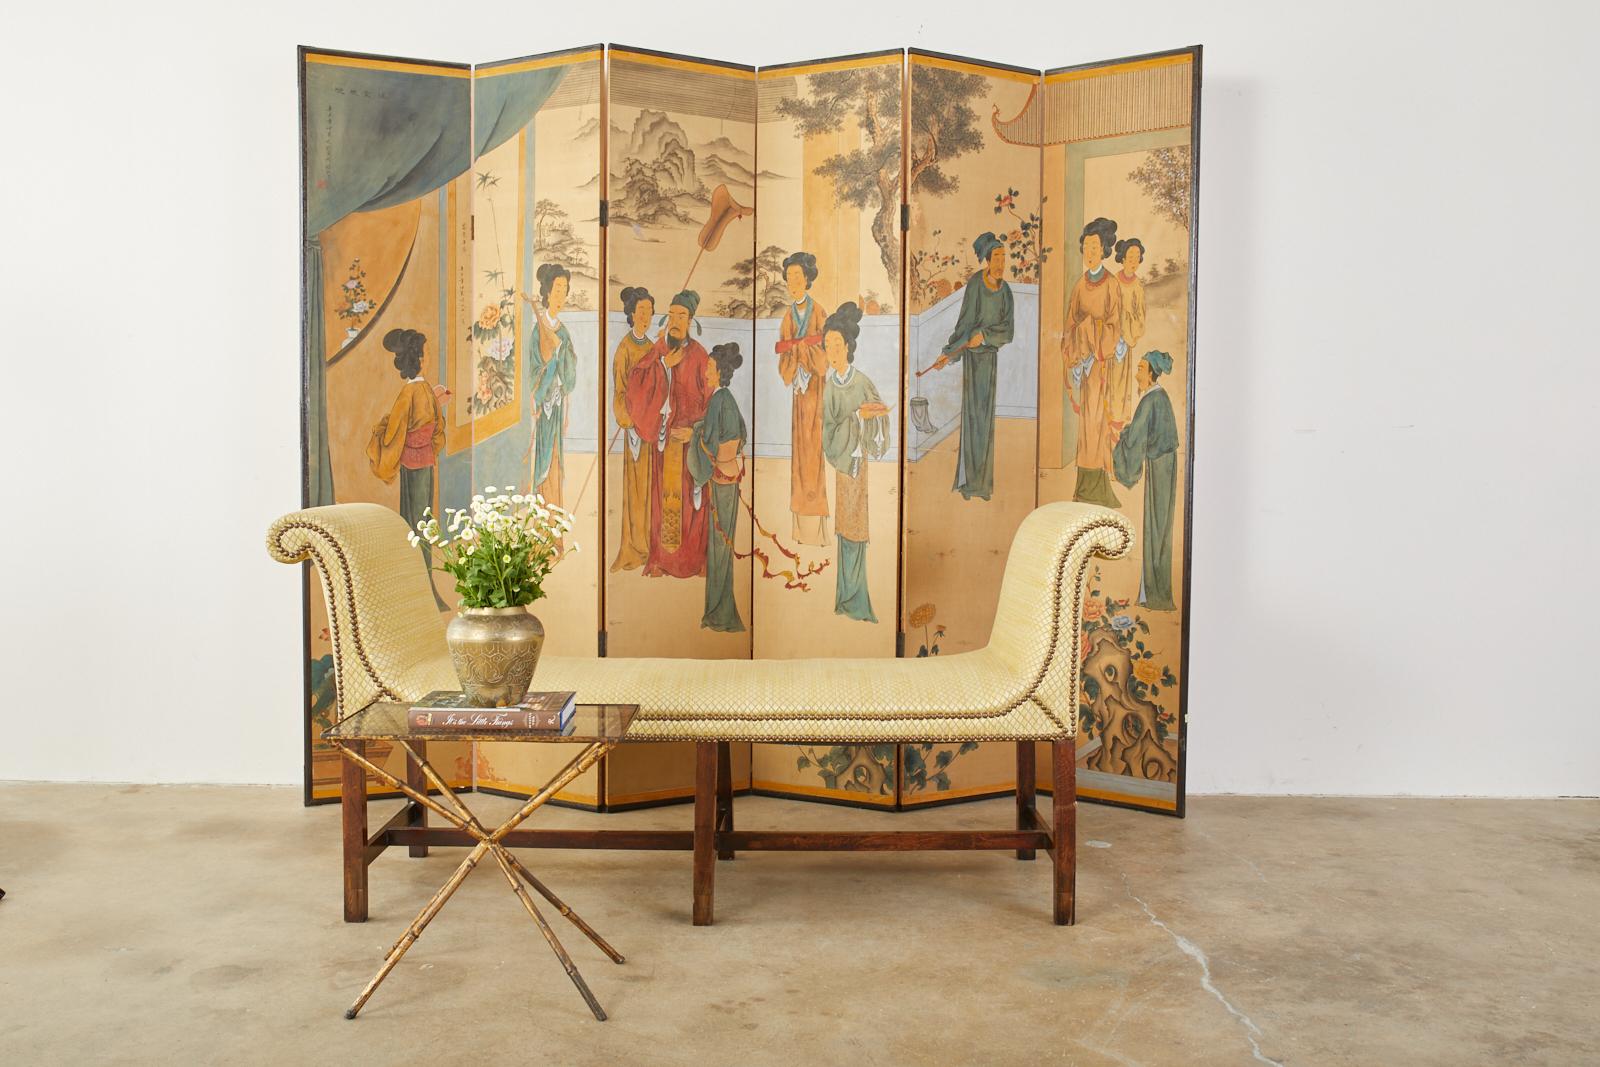 Qing style Chinese export painting featuring figures in a palace garden. Wallpaper scene mounted to a folding six panel screen and set in an ebonized wood frame. Beautiful vibrant colors with a lovely faded patina over a saffron yellow background.